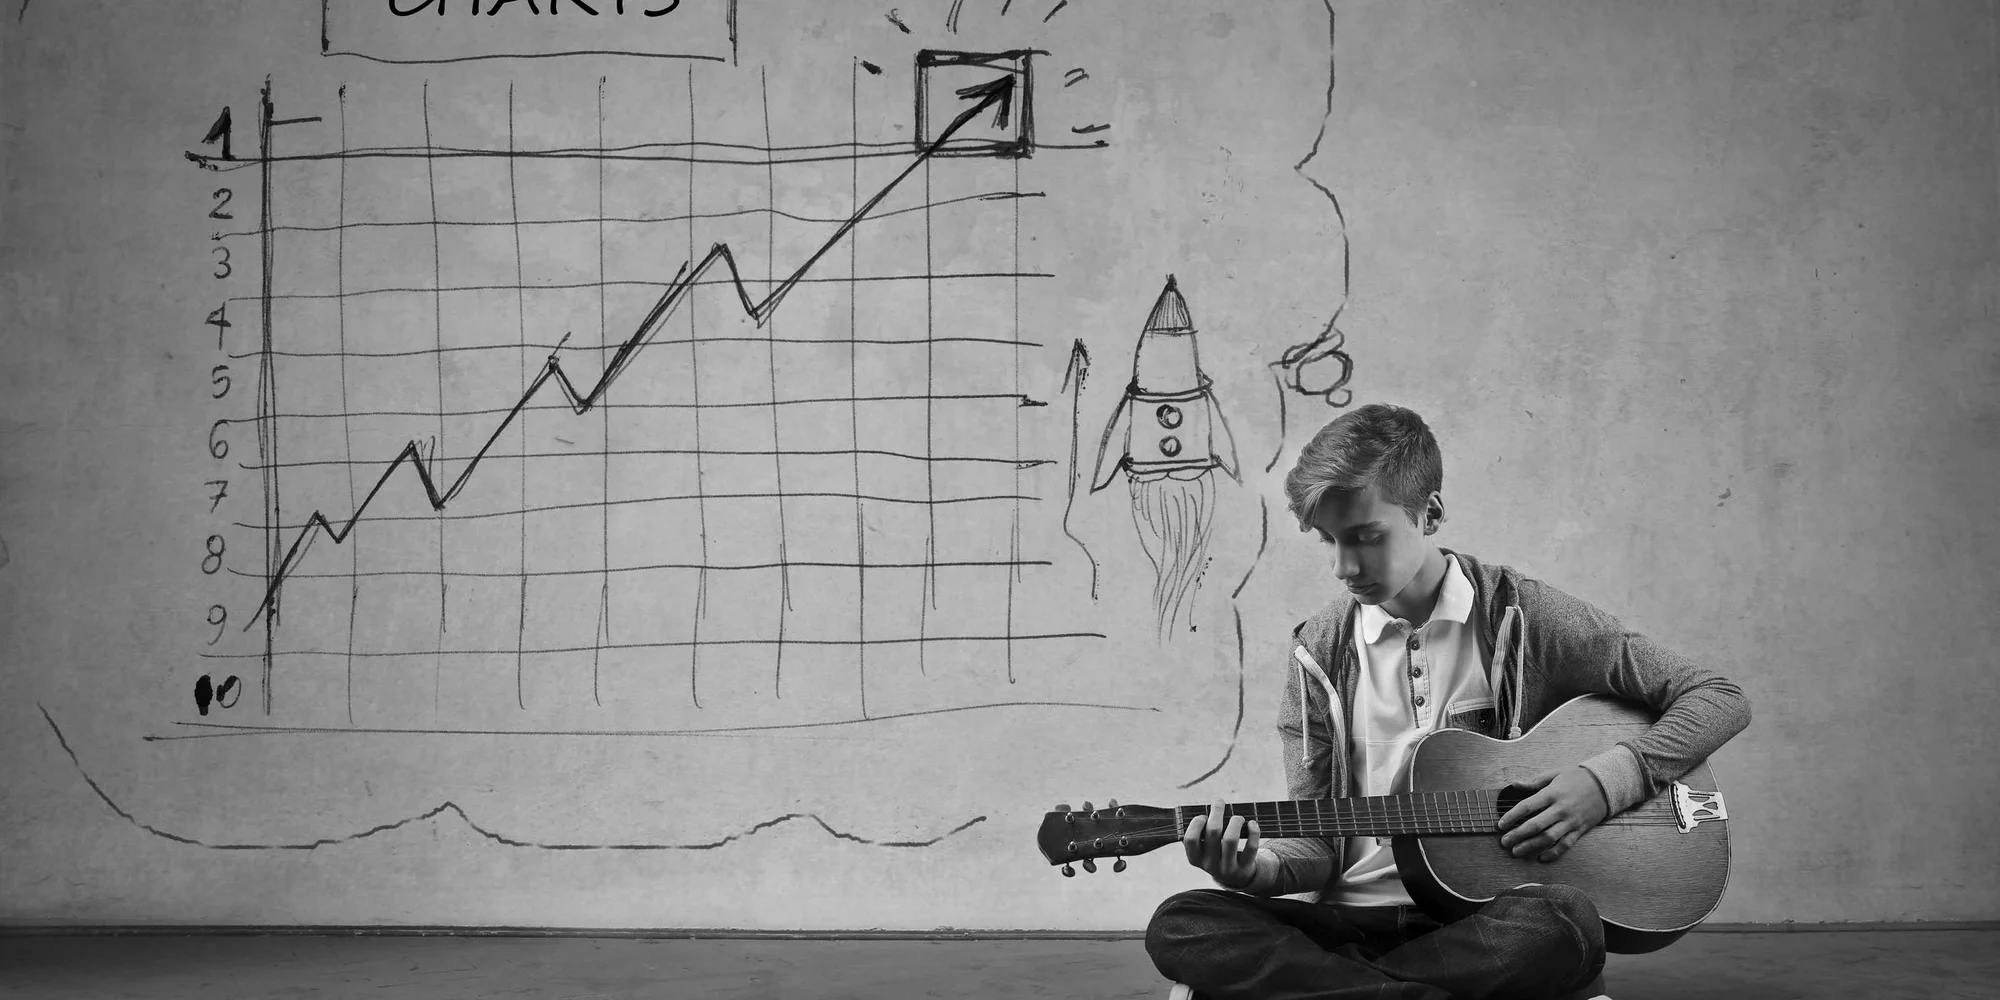 A male teenager is sitting on the floor playing an acoustic guitar in front of a chart that points up and has a rocket launching to the right of it.